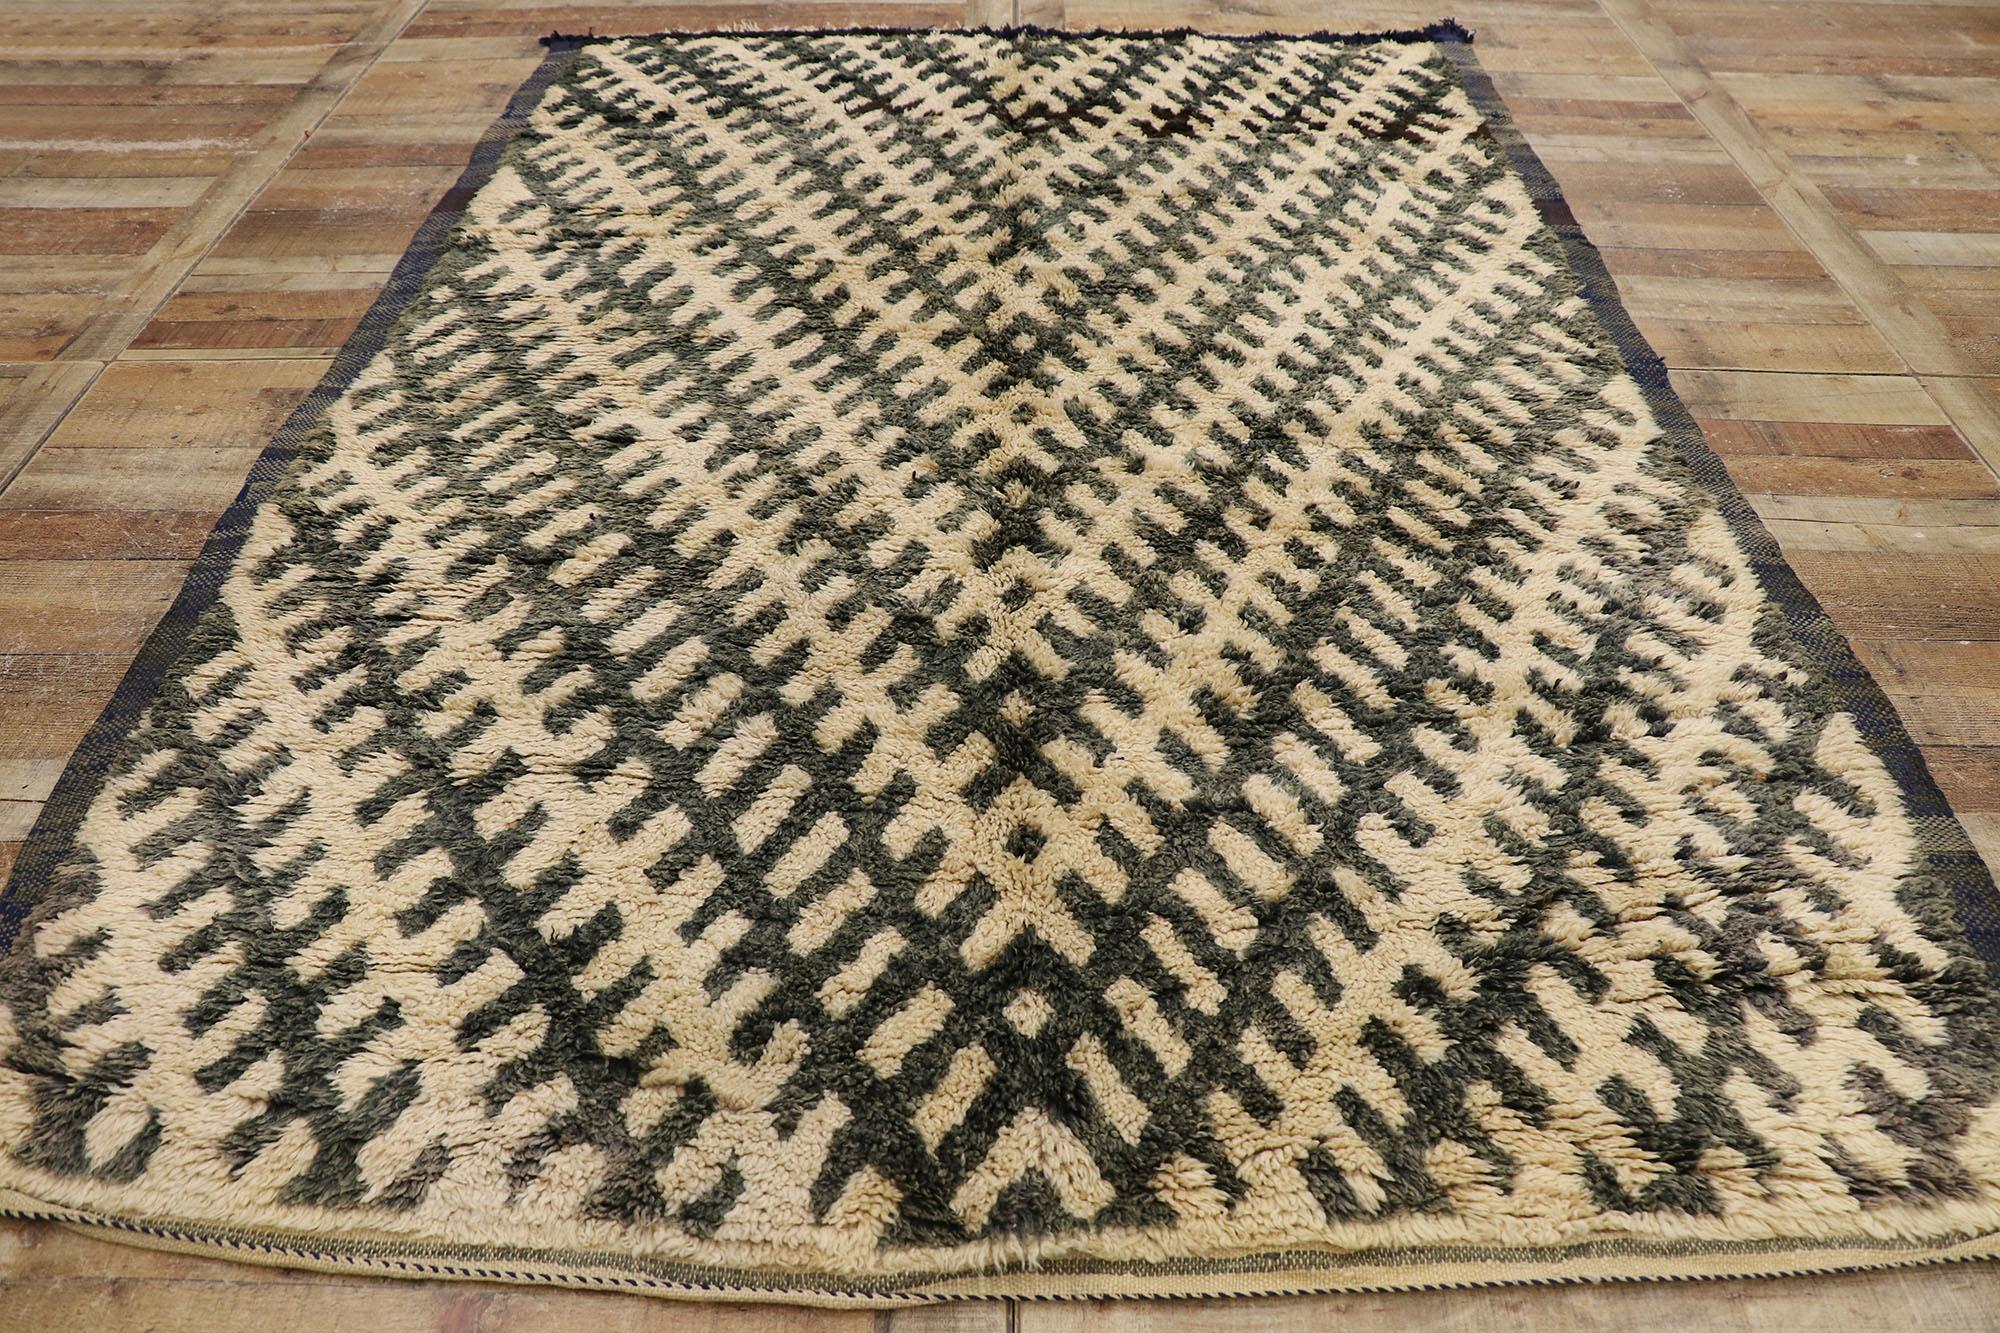 Wool Vintage Moroccan Beni Ourain Rug, Simplicity Meets Modern Sophistication For Sale